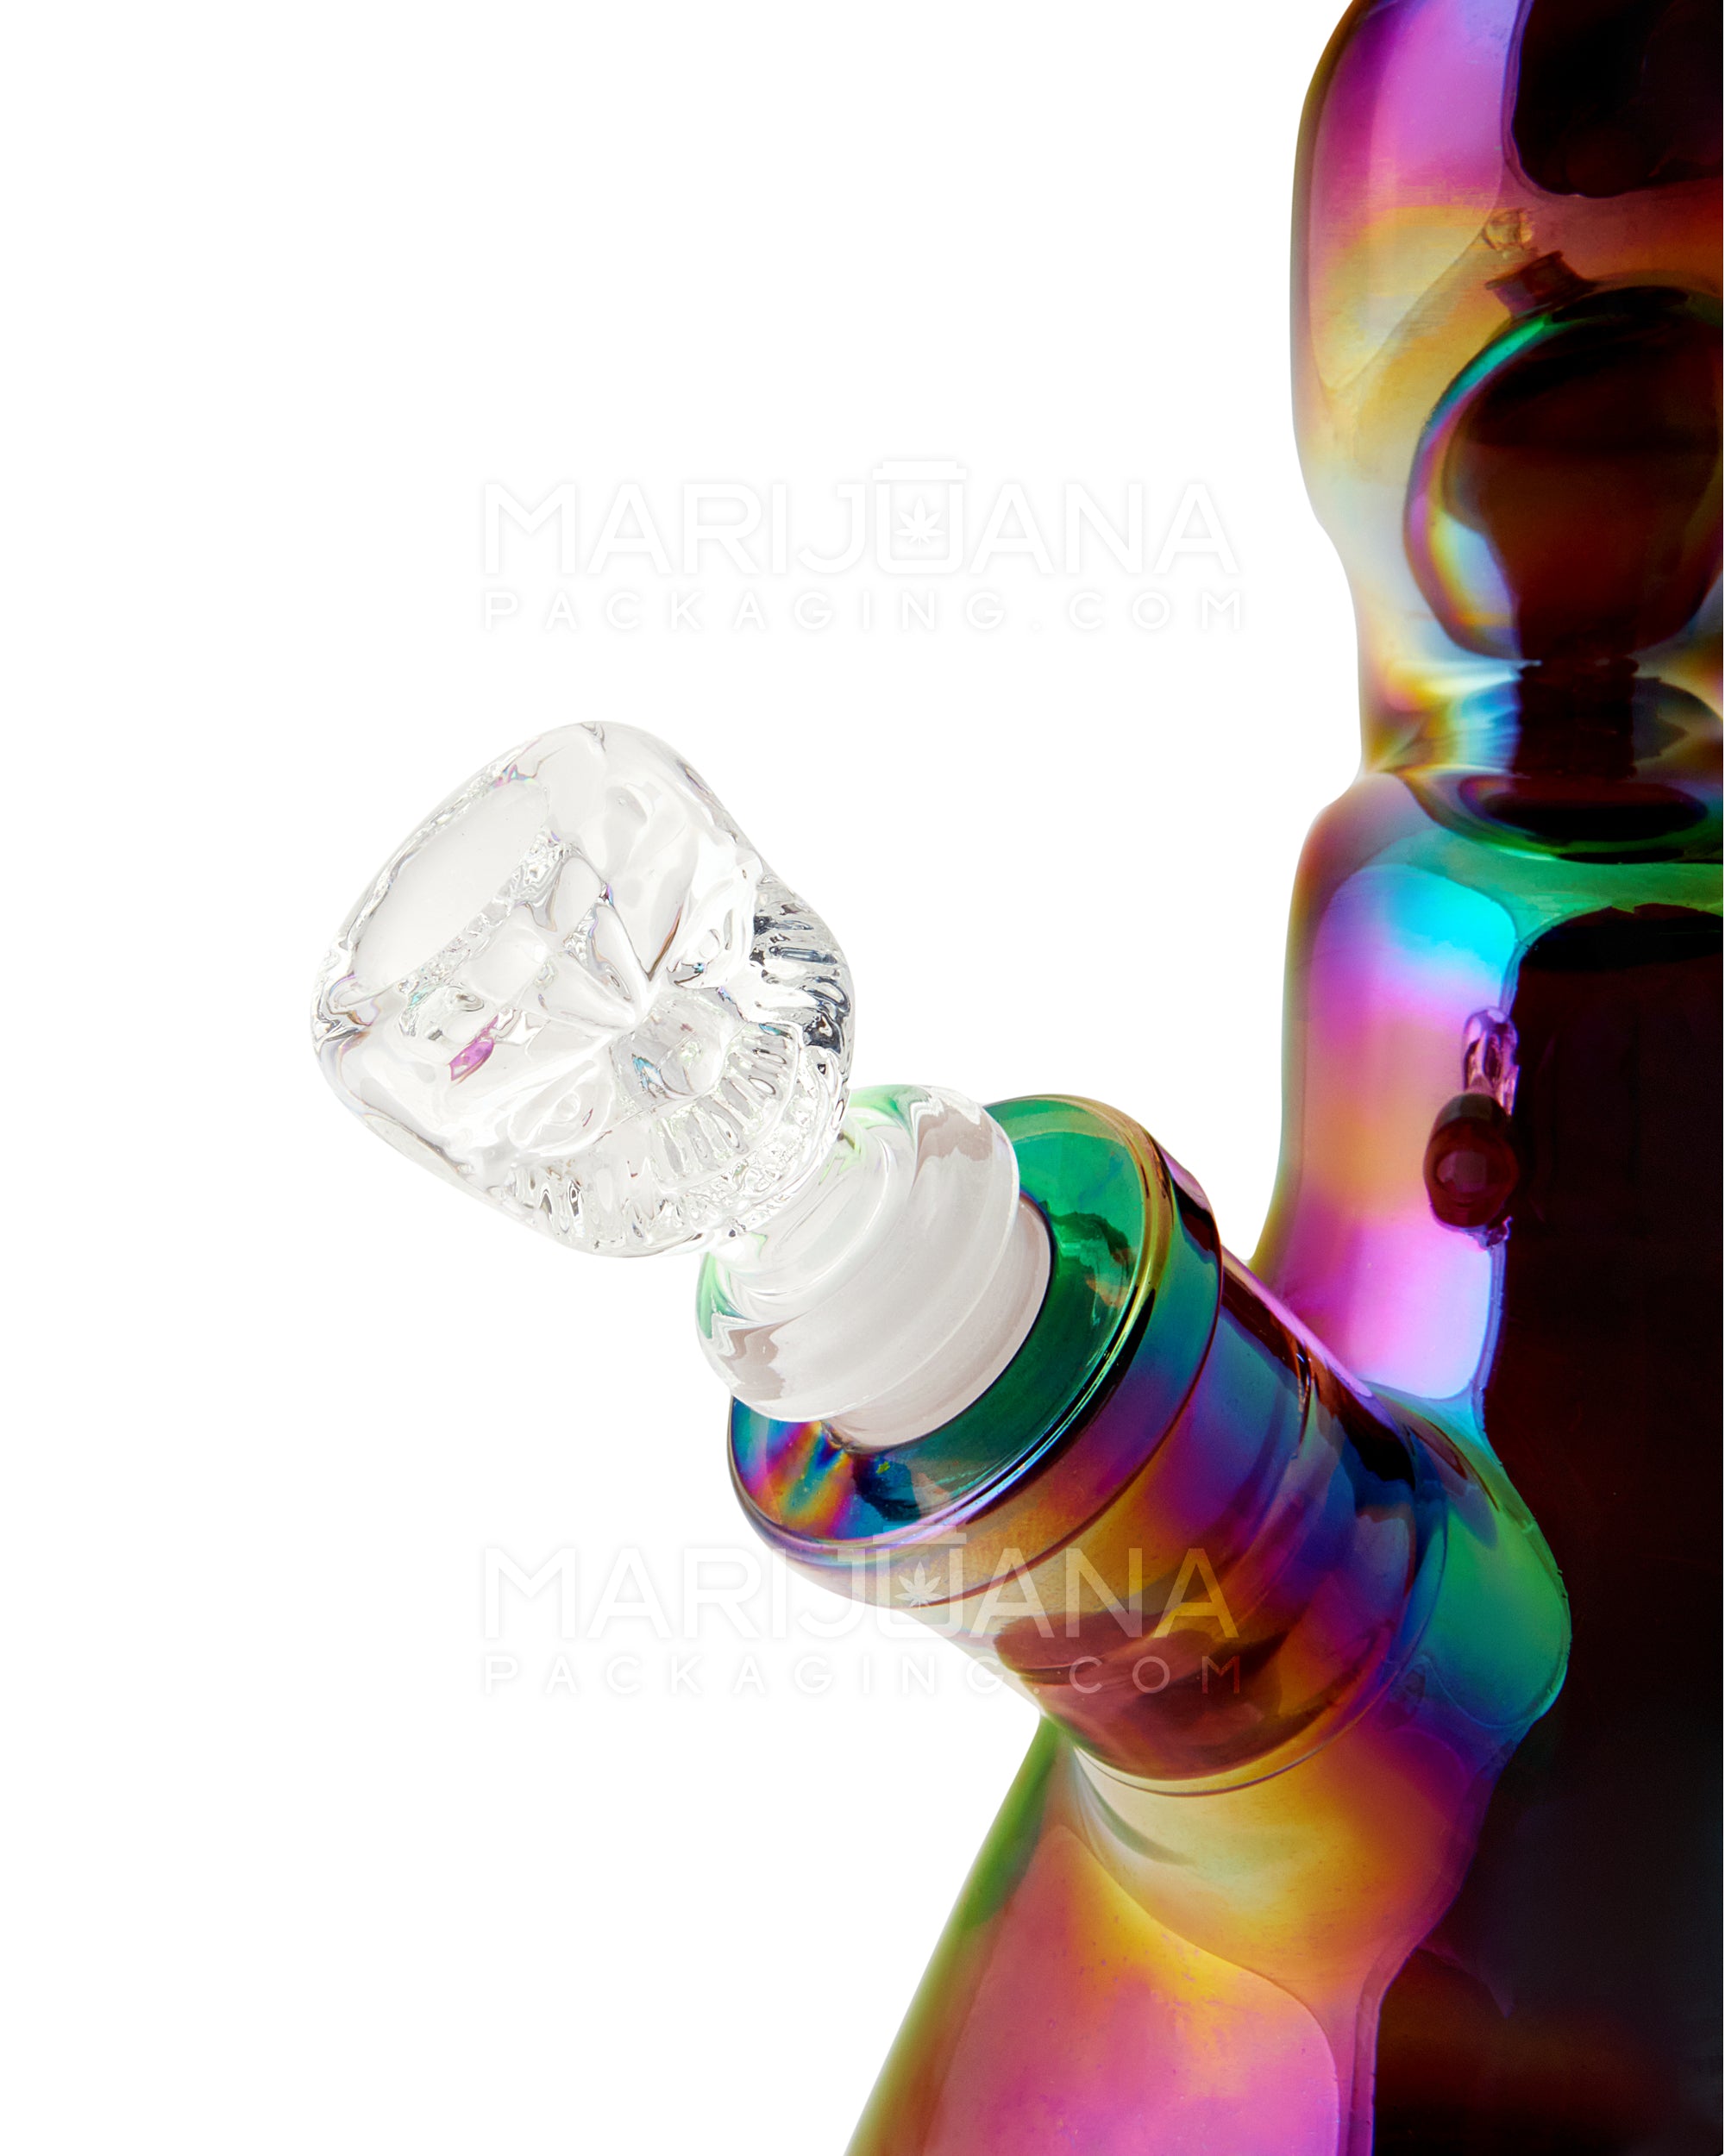 USA Glass | Z-Neck Heavy Zong Glass Beaker Water Pipe | 14in Tall - 14mm Bowl - Assorted